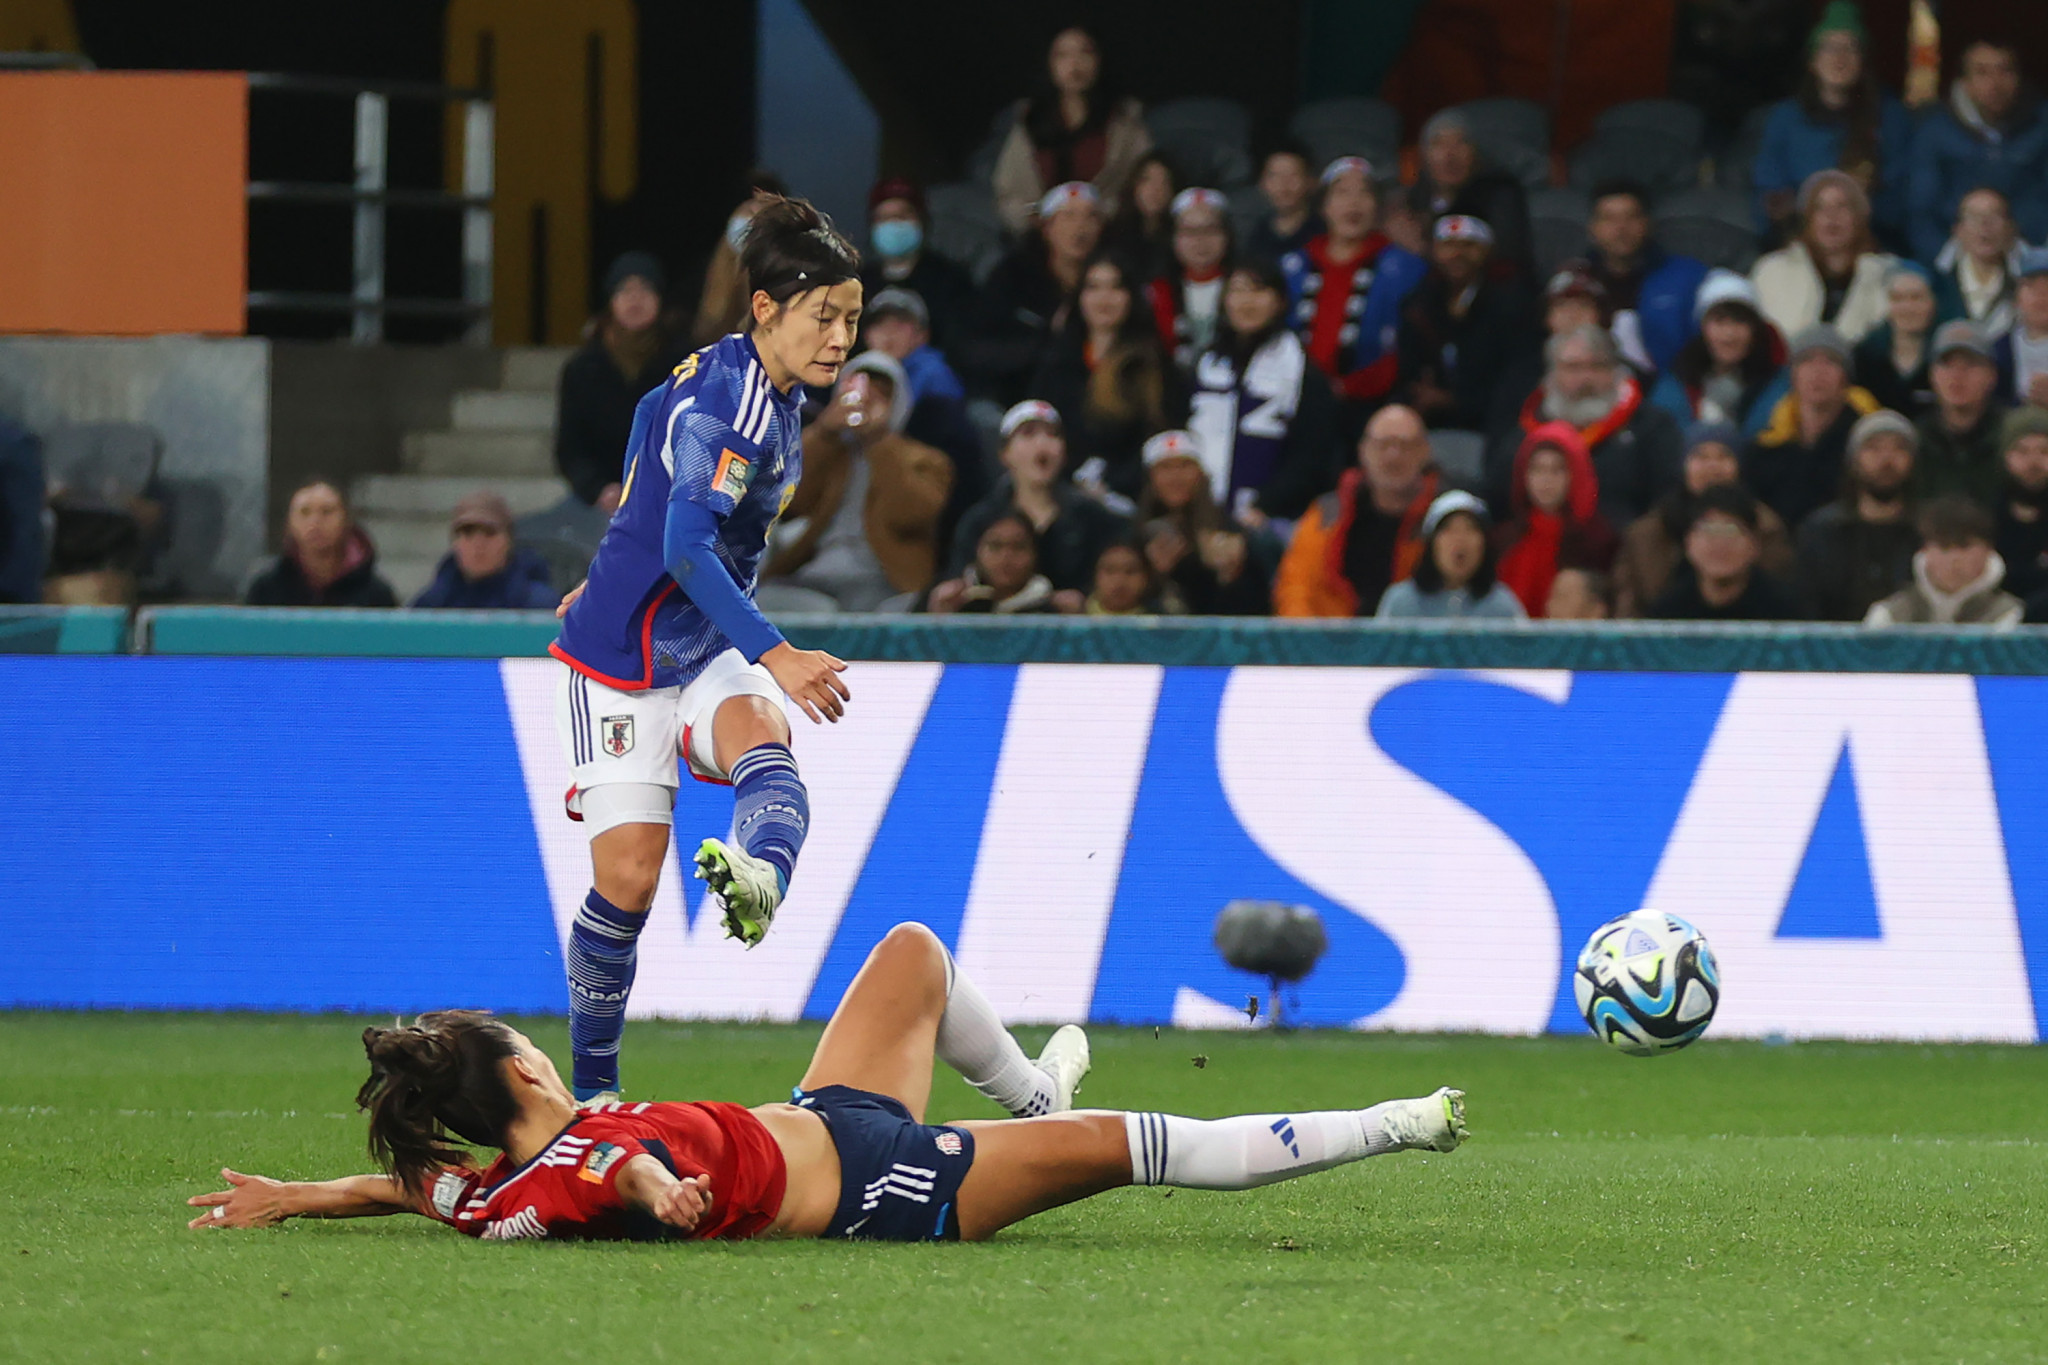 Earlier, Hikaru Naomoto got the ball past Daniela Solera with a low powerful drive to open the scoring against Costa Rica ©Getty Images